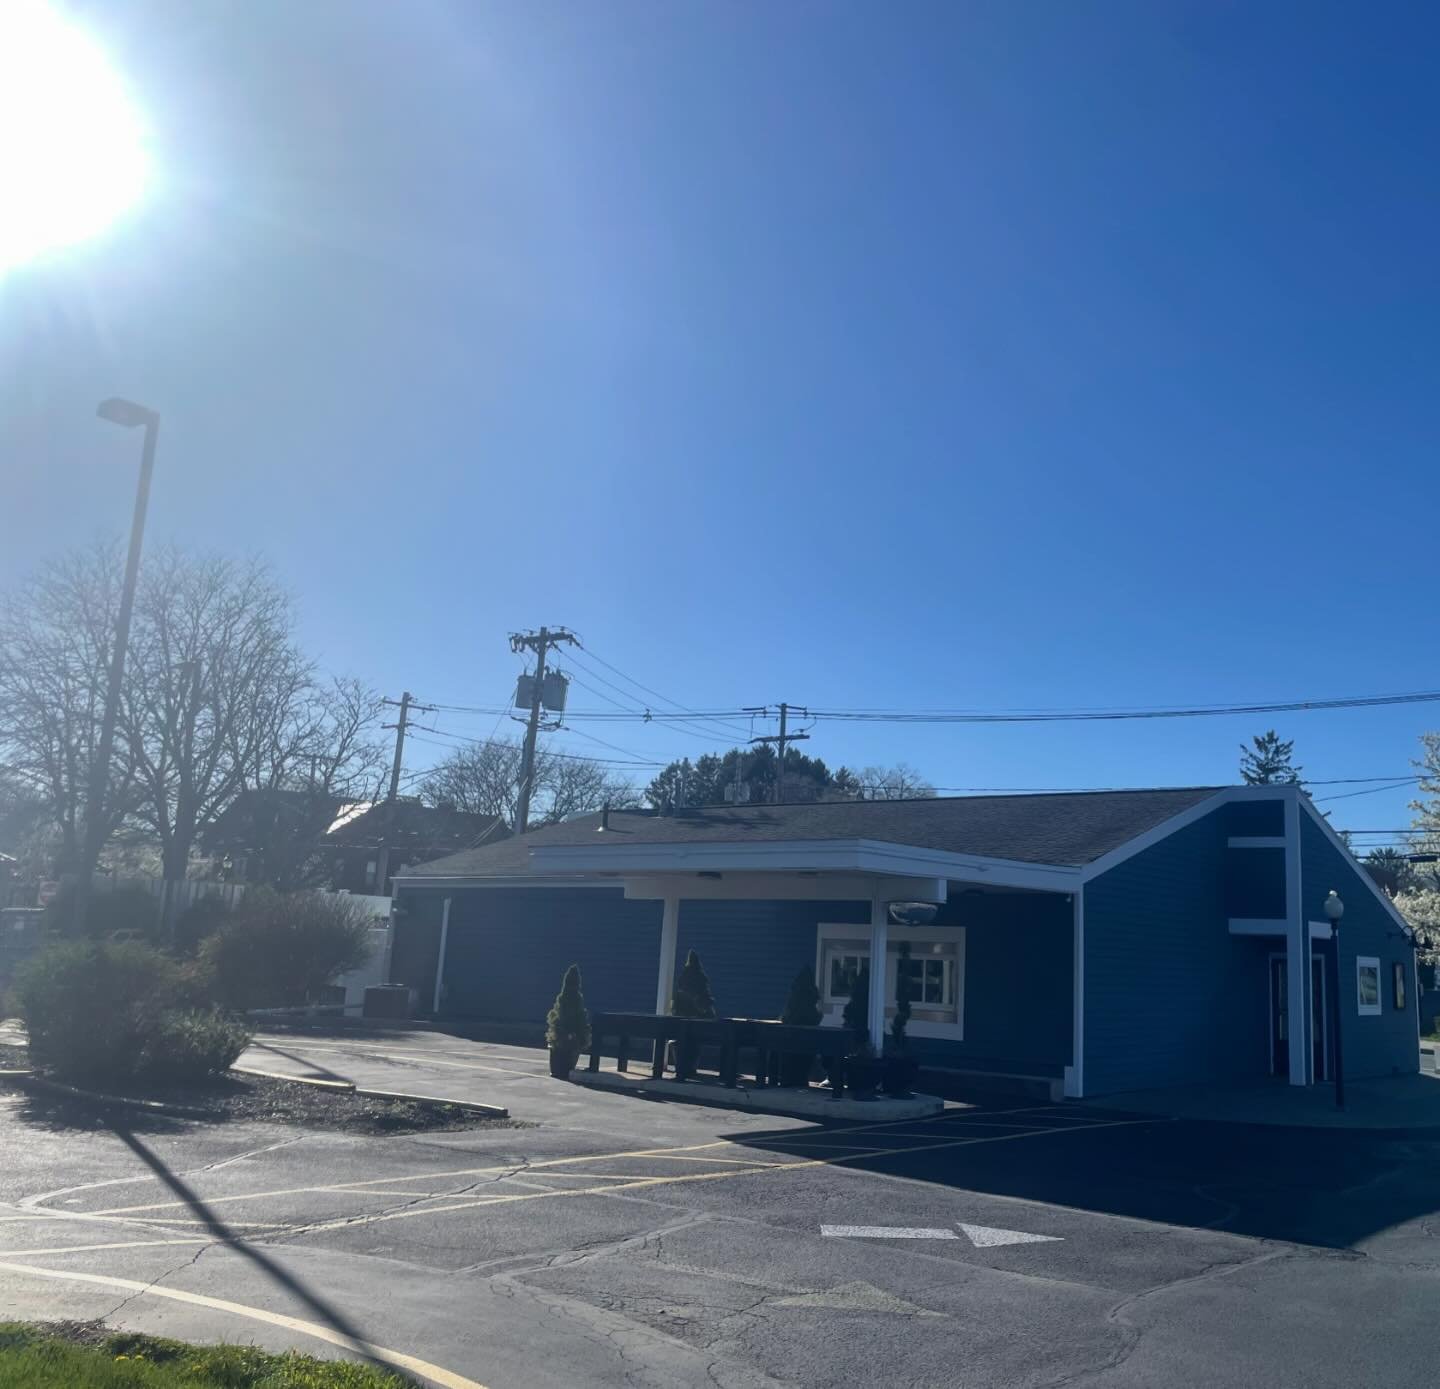 Sunny day got us wanting to share the good news&hellip;

This spot, and this old drive thru/carport will soon be transformed into an outdoor oasis! 

Last week, we got notice that we have been approved for a grant that will help us develop an outdoor